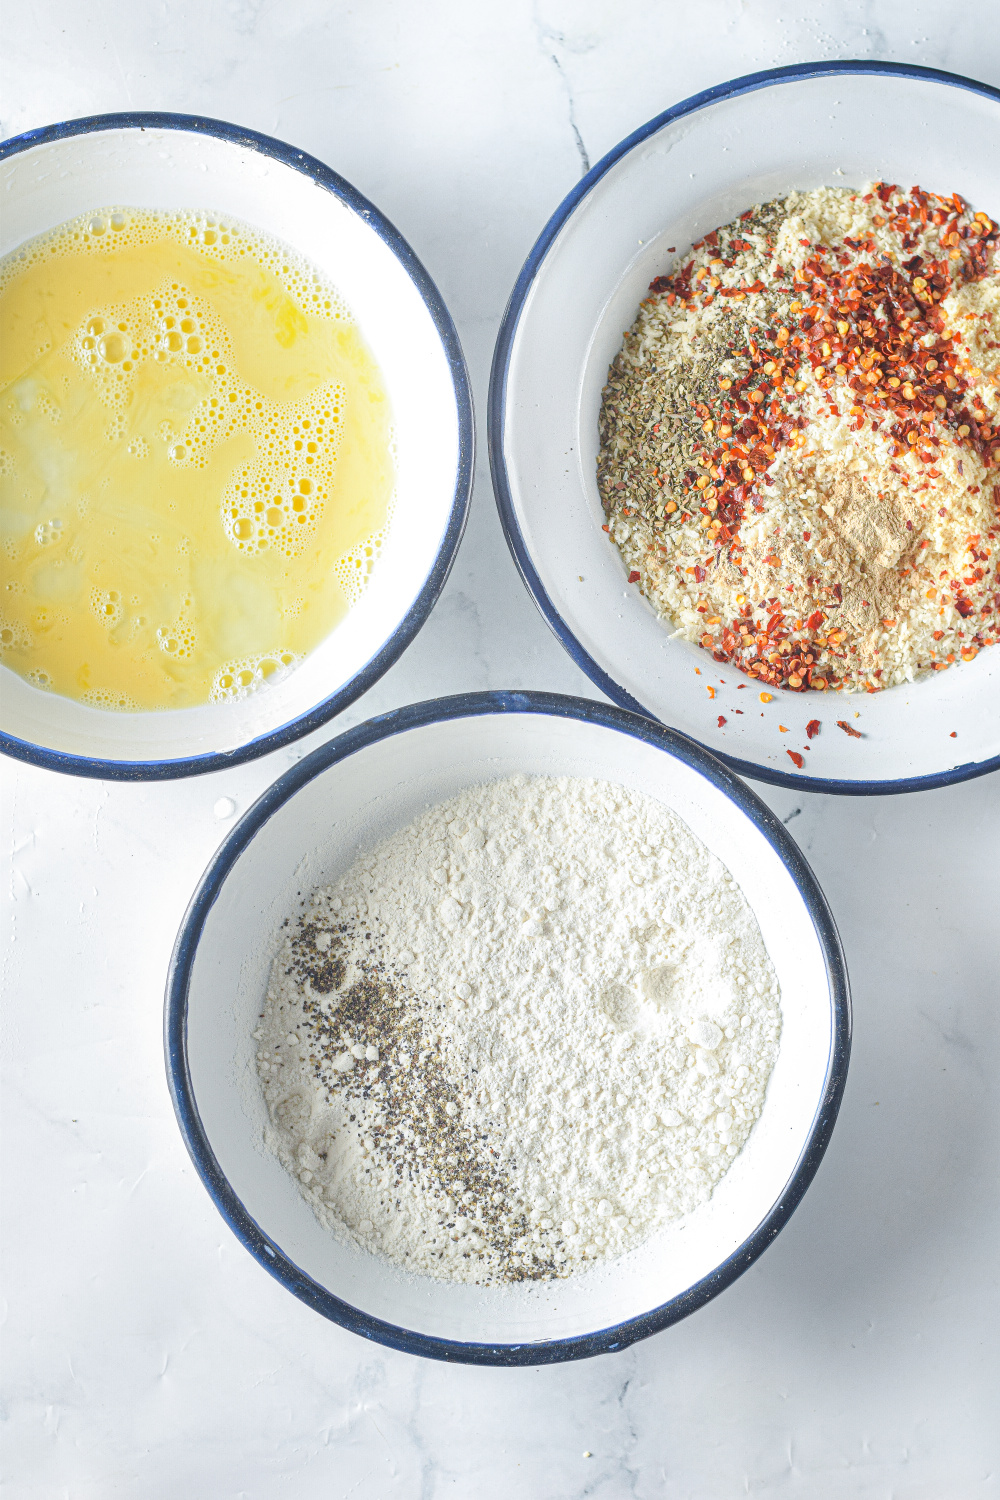  seasonings, flour and egg wash in bowls